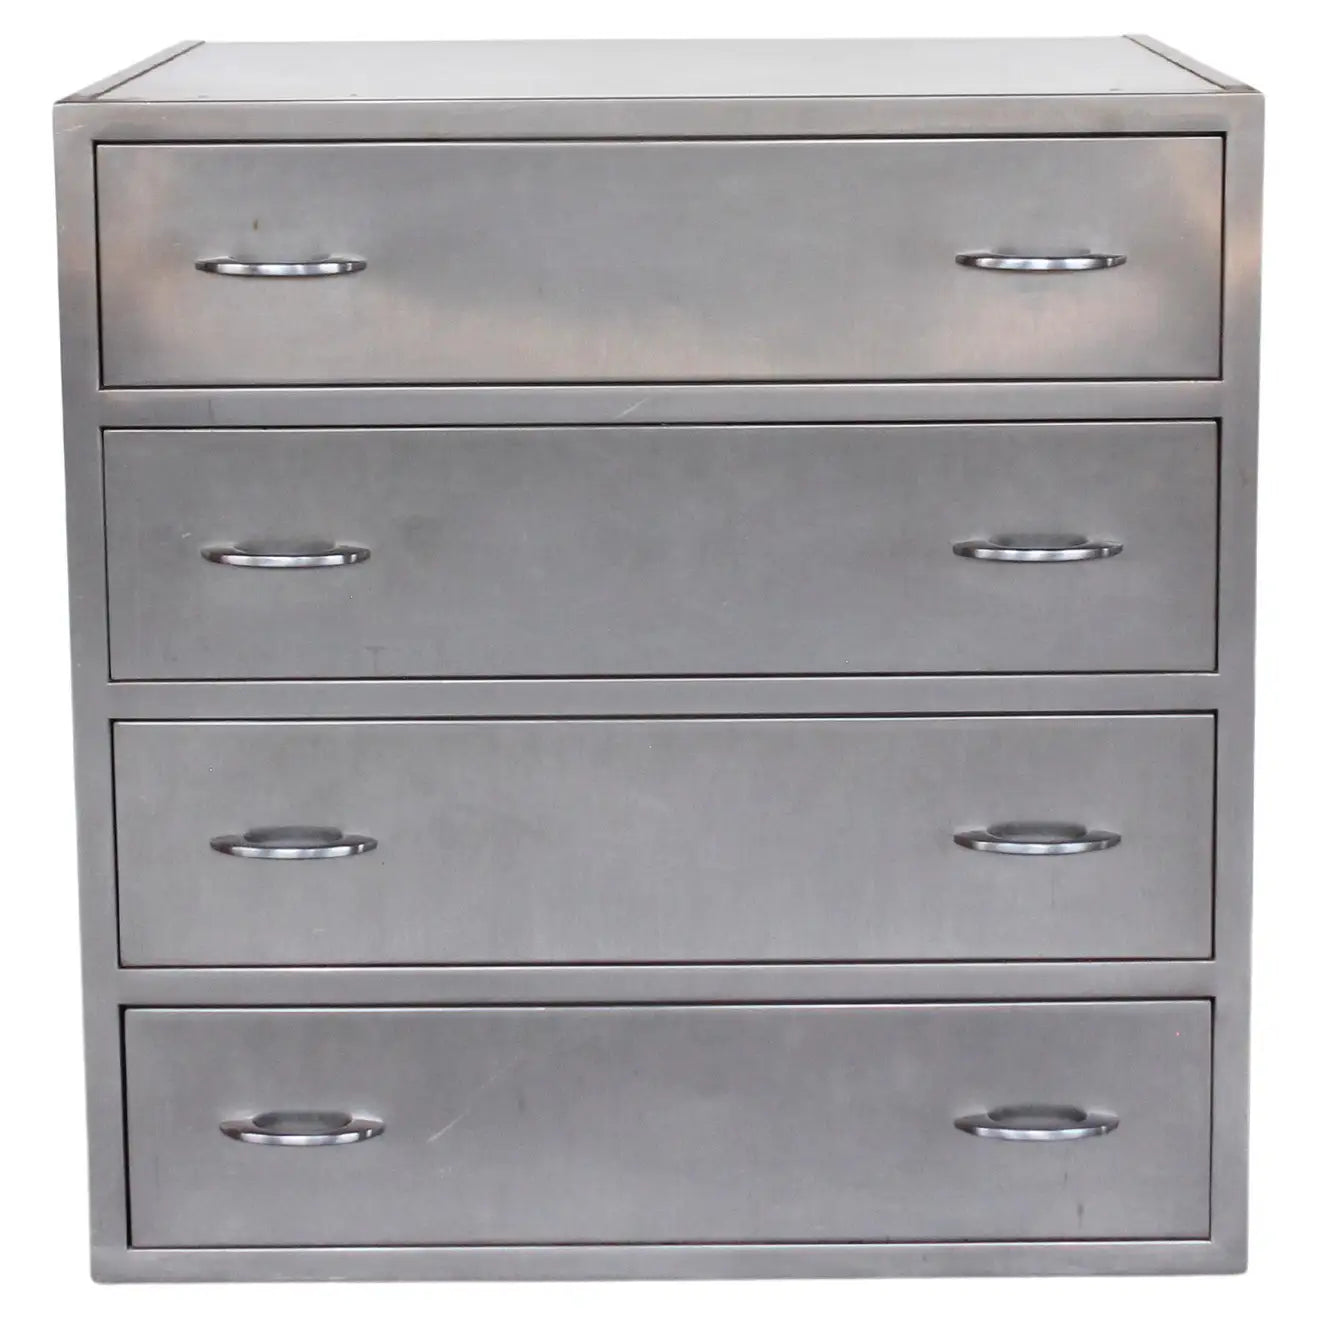 American Industrial Stainless Steel Chest with 4 Drawers, C. 1940s